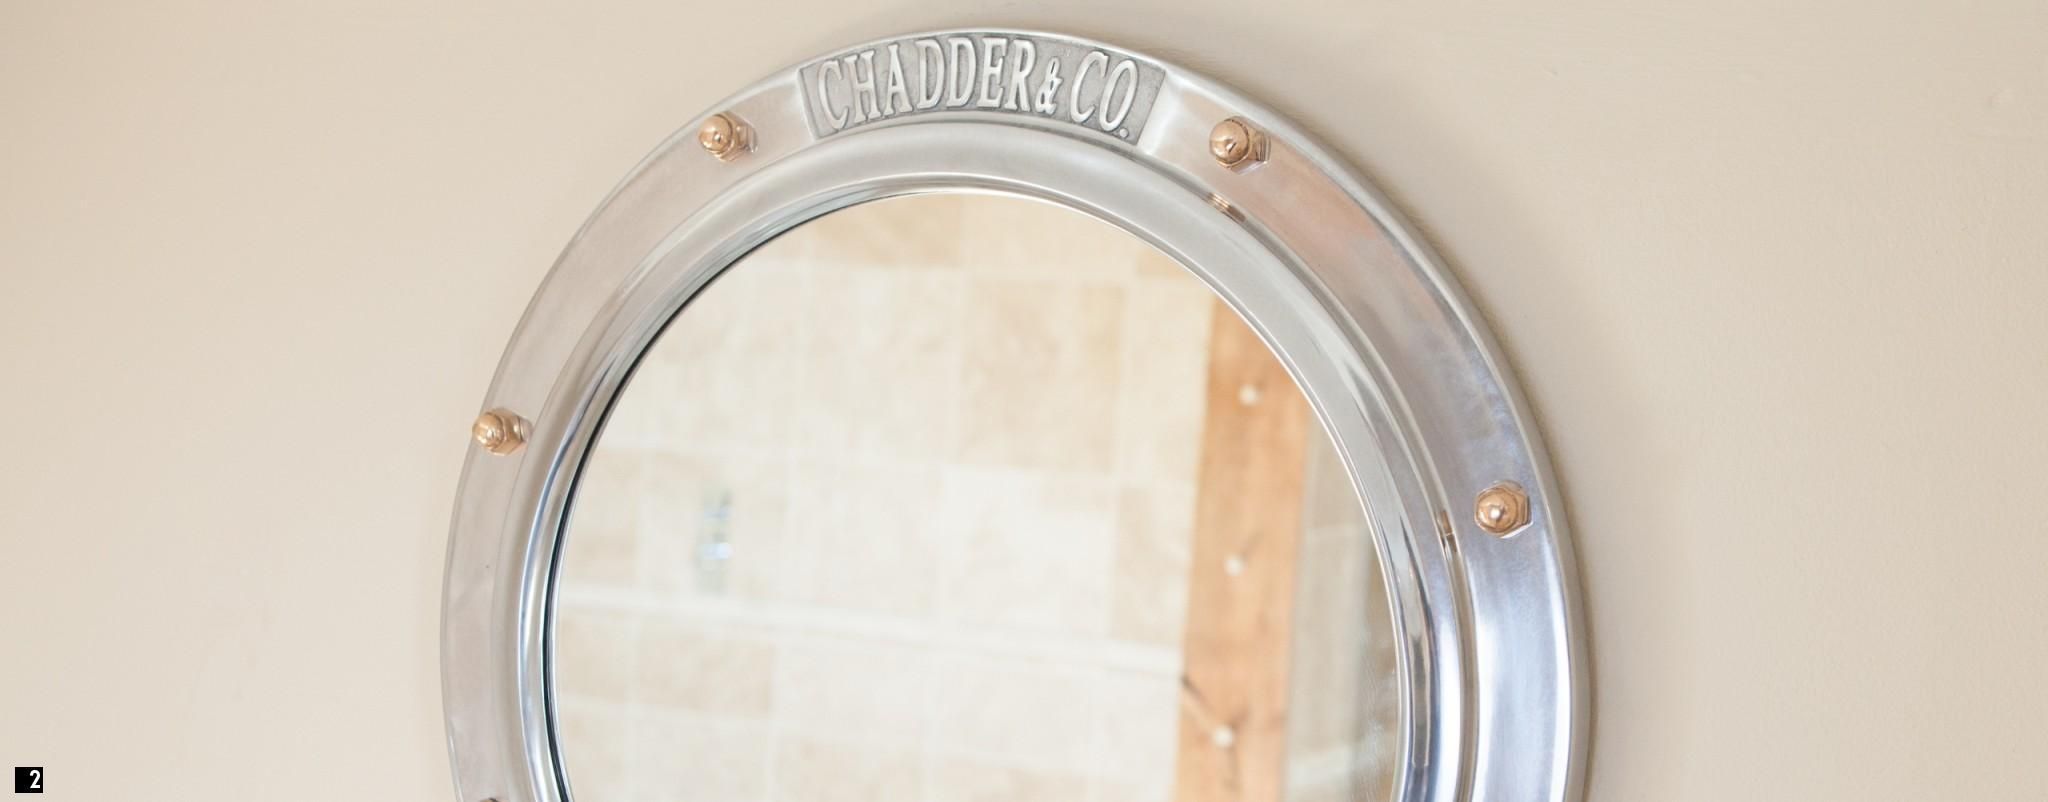 Porthole Mirrors | Product Categories | Chadder & Co (View 7 of 20)